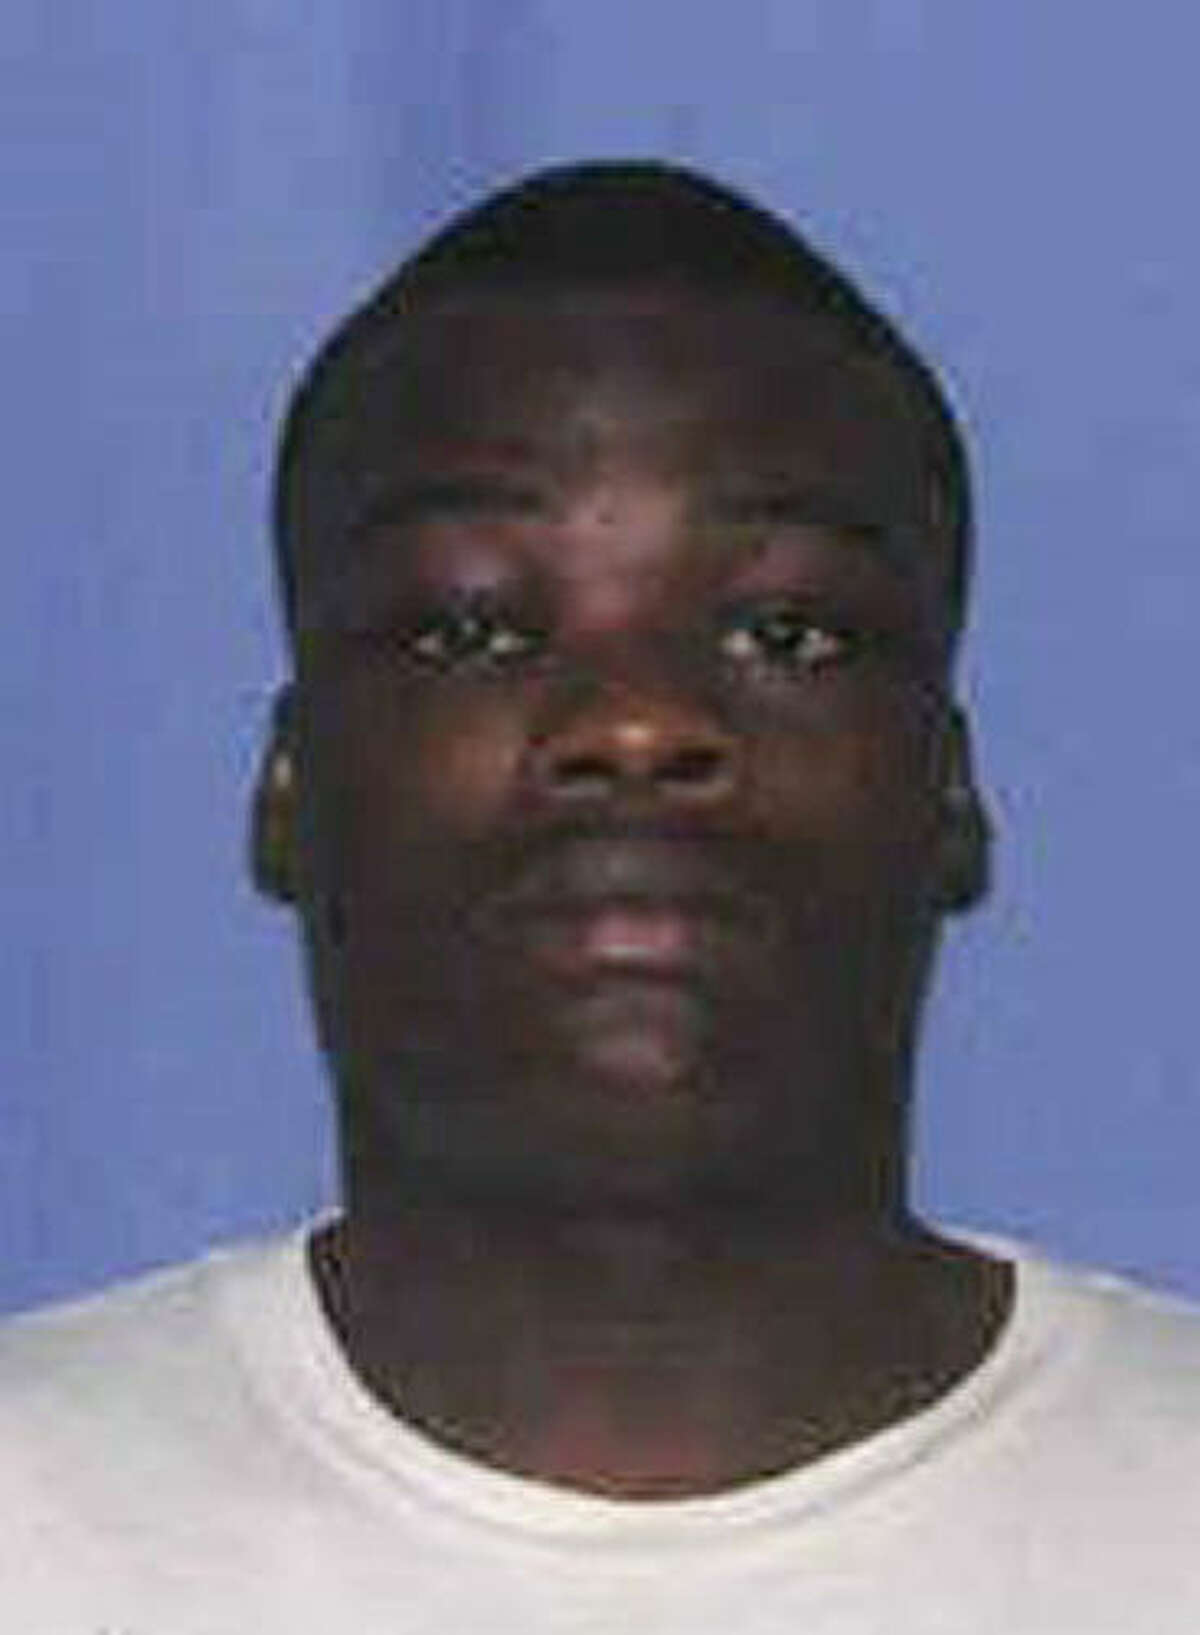 Jeremy Powell captured Smith's gun and shot him and himself, Jackson police say.